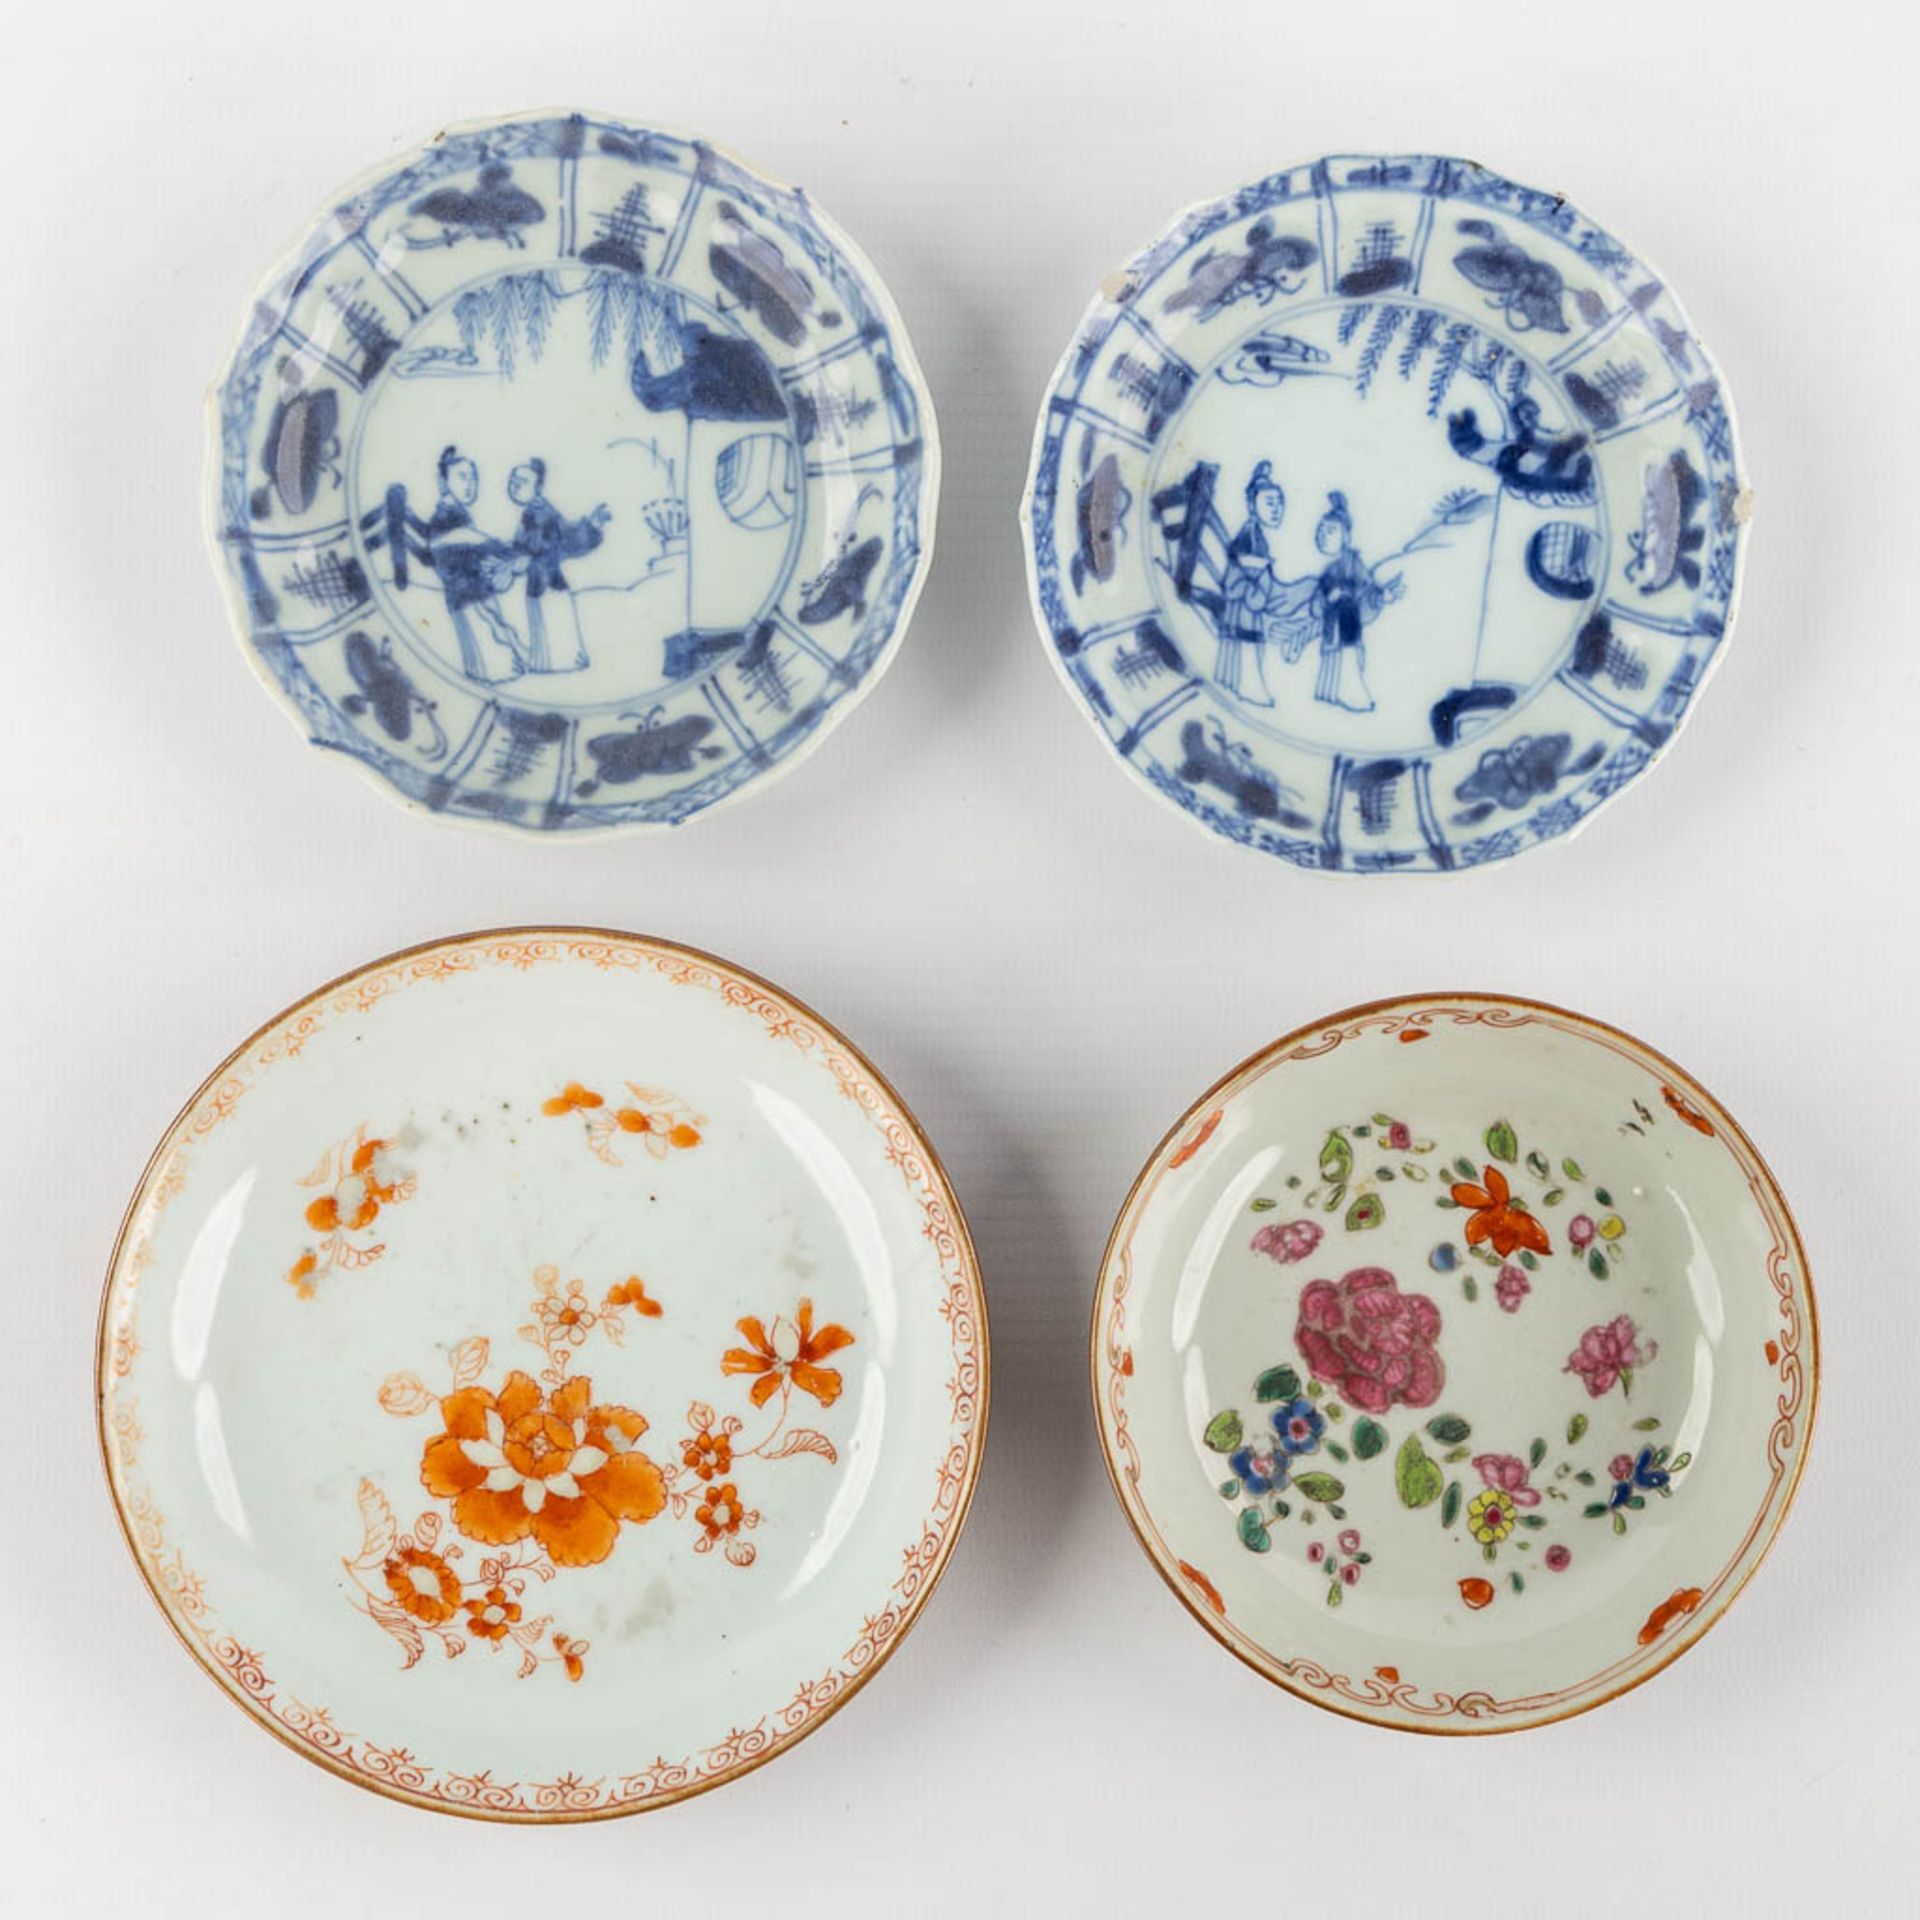 Fifteen Chinese cups, saucers and plates, blue white and Famille Roze. (D:23,4 cm) - Bild 9 aus 15